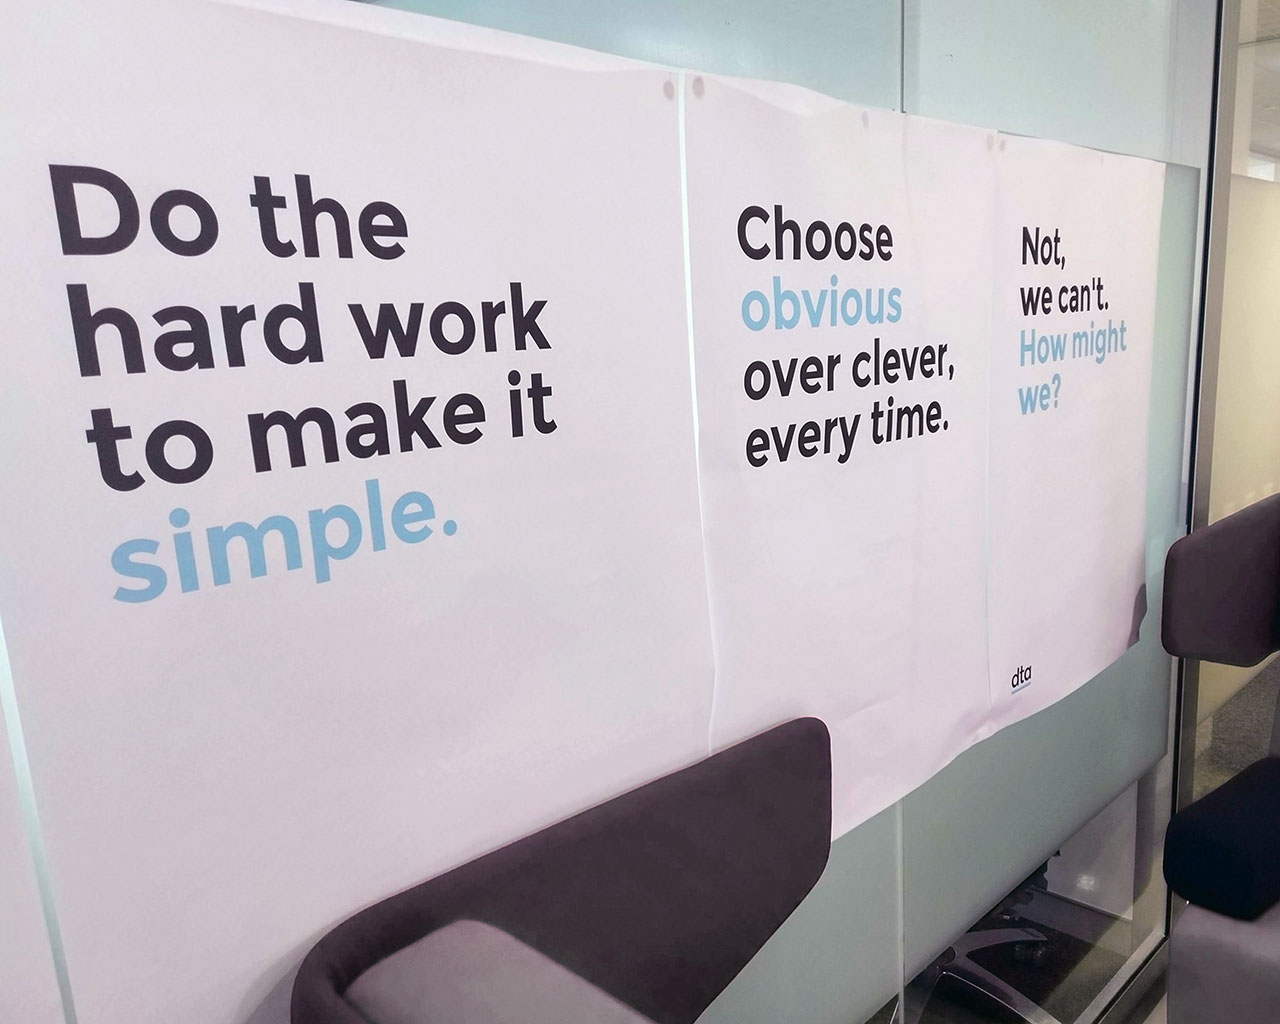 A set of posters found on the walls at the Digital Transformation Agency that say do the hard work to make it simple and choose obvious over clever every time.